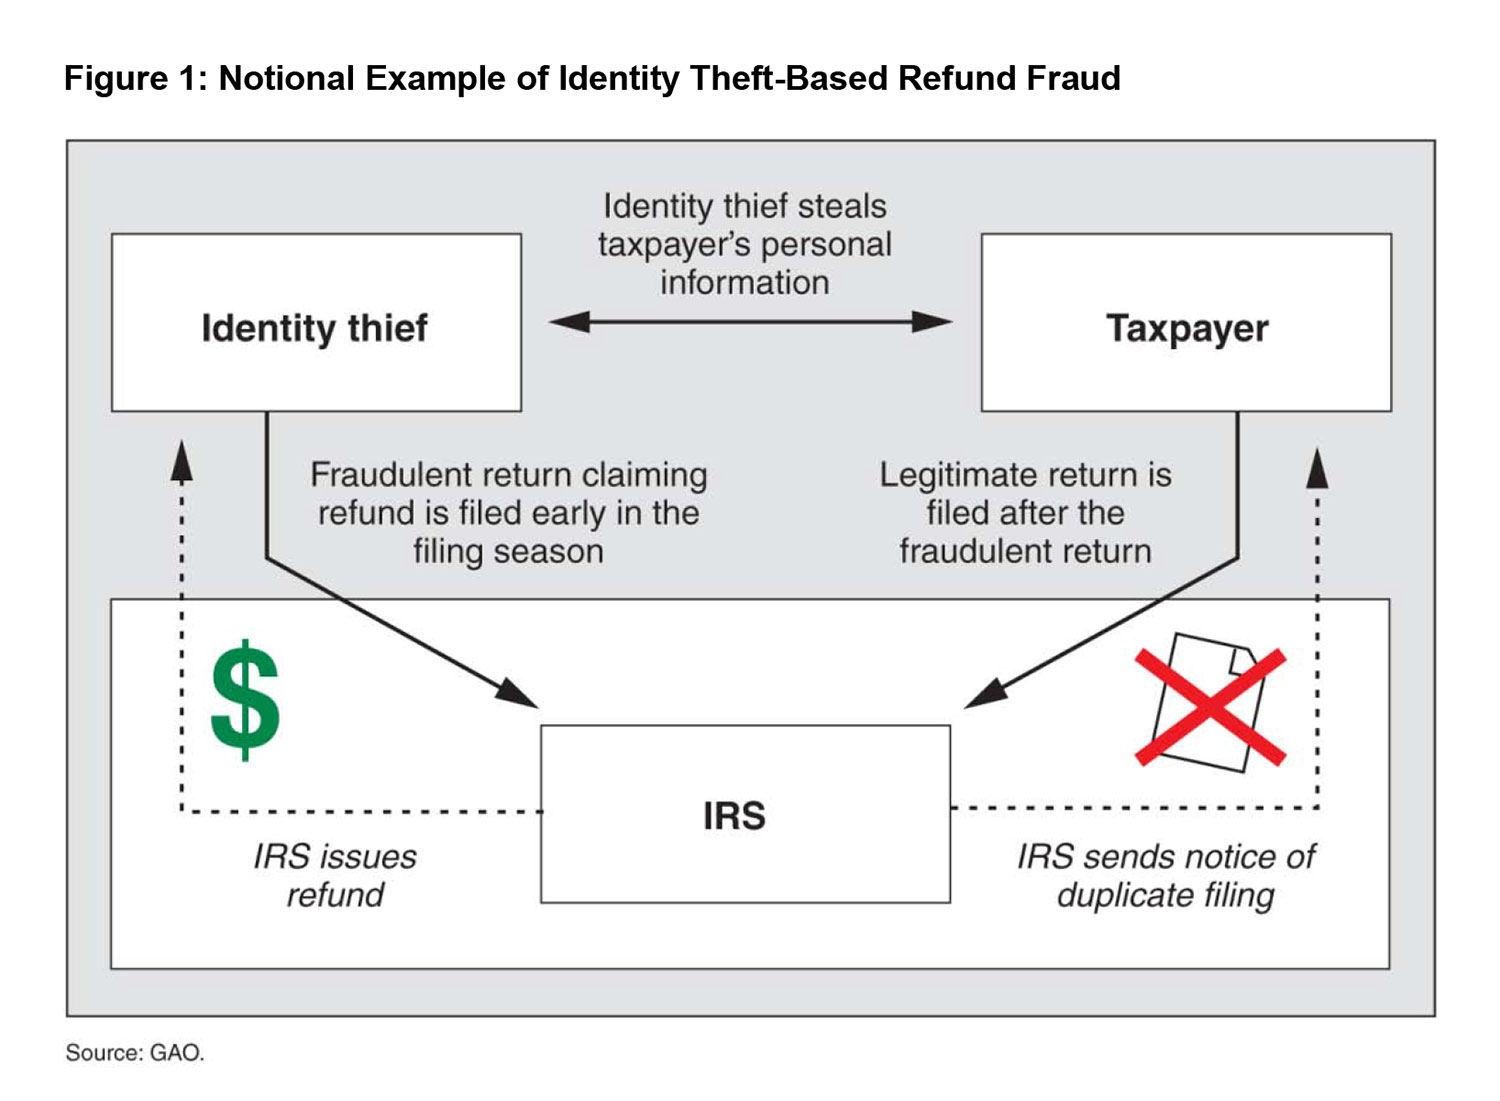 Notional Example of Identity Theft-Based Refund Fraud graphic